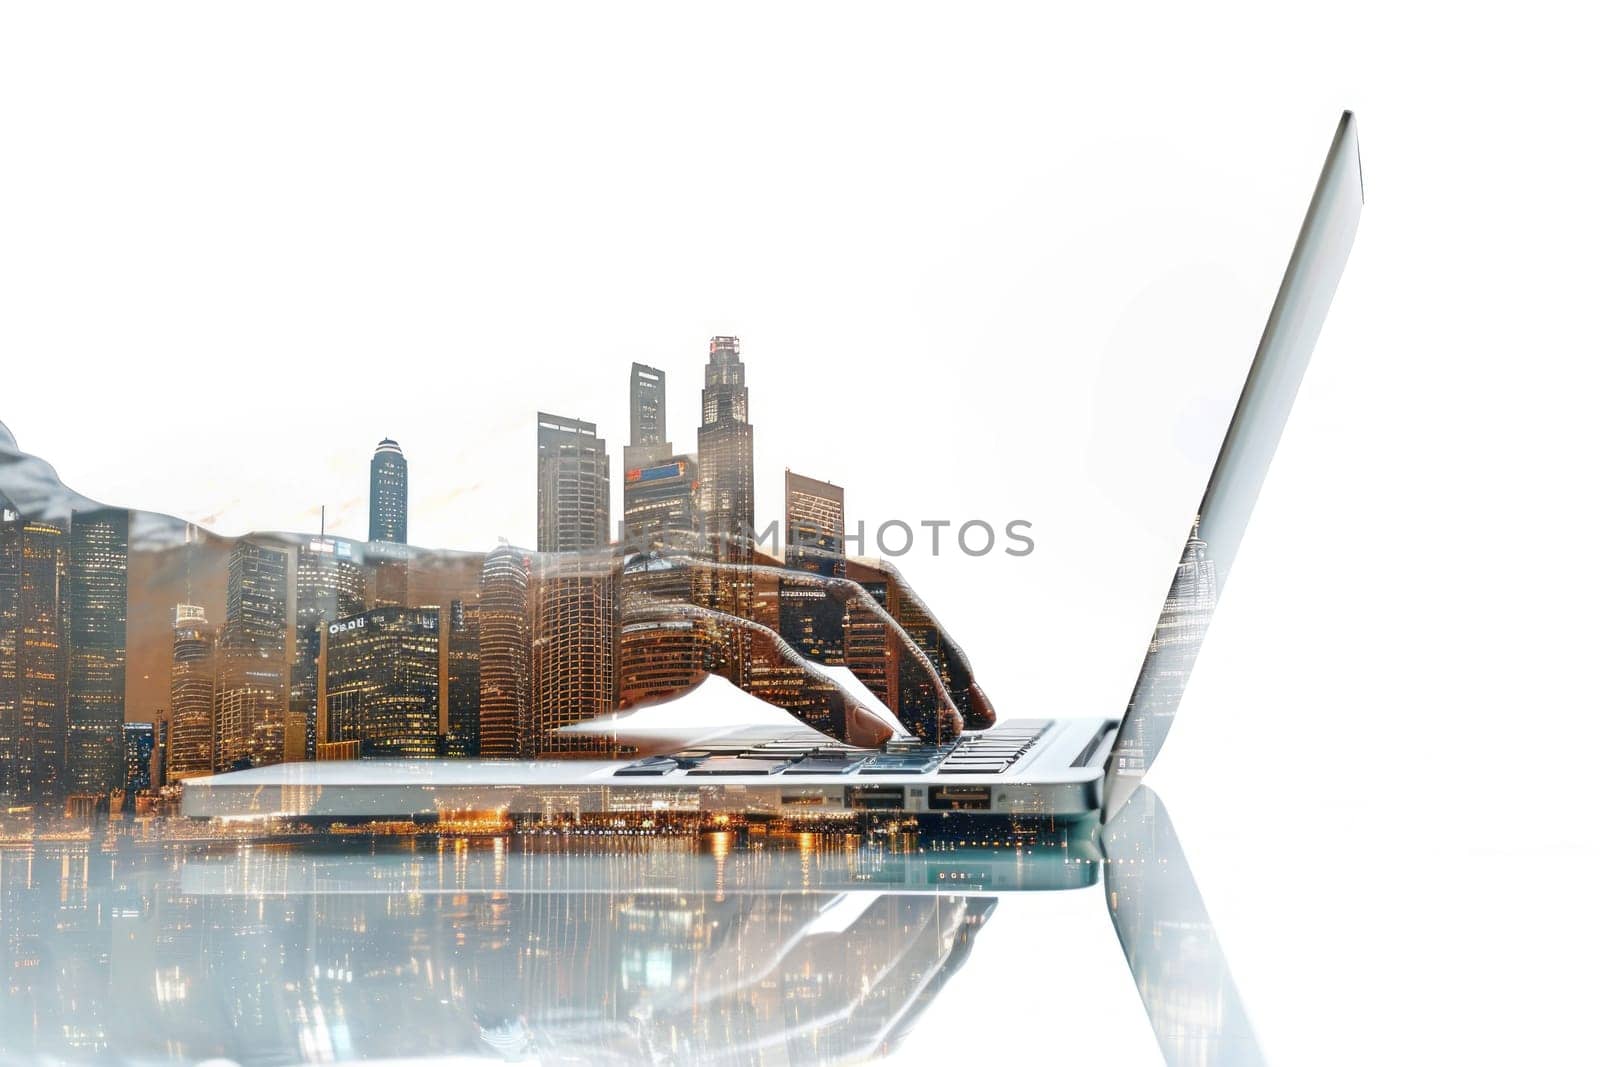 Businessman Using Laptop with Business City Double Exposure on White Background Concept Modern Urban Professionalism.